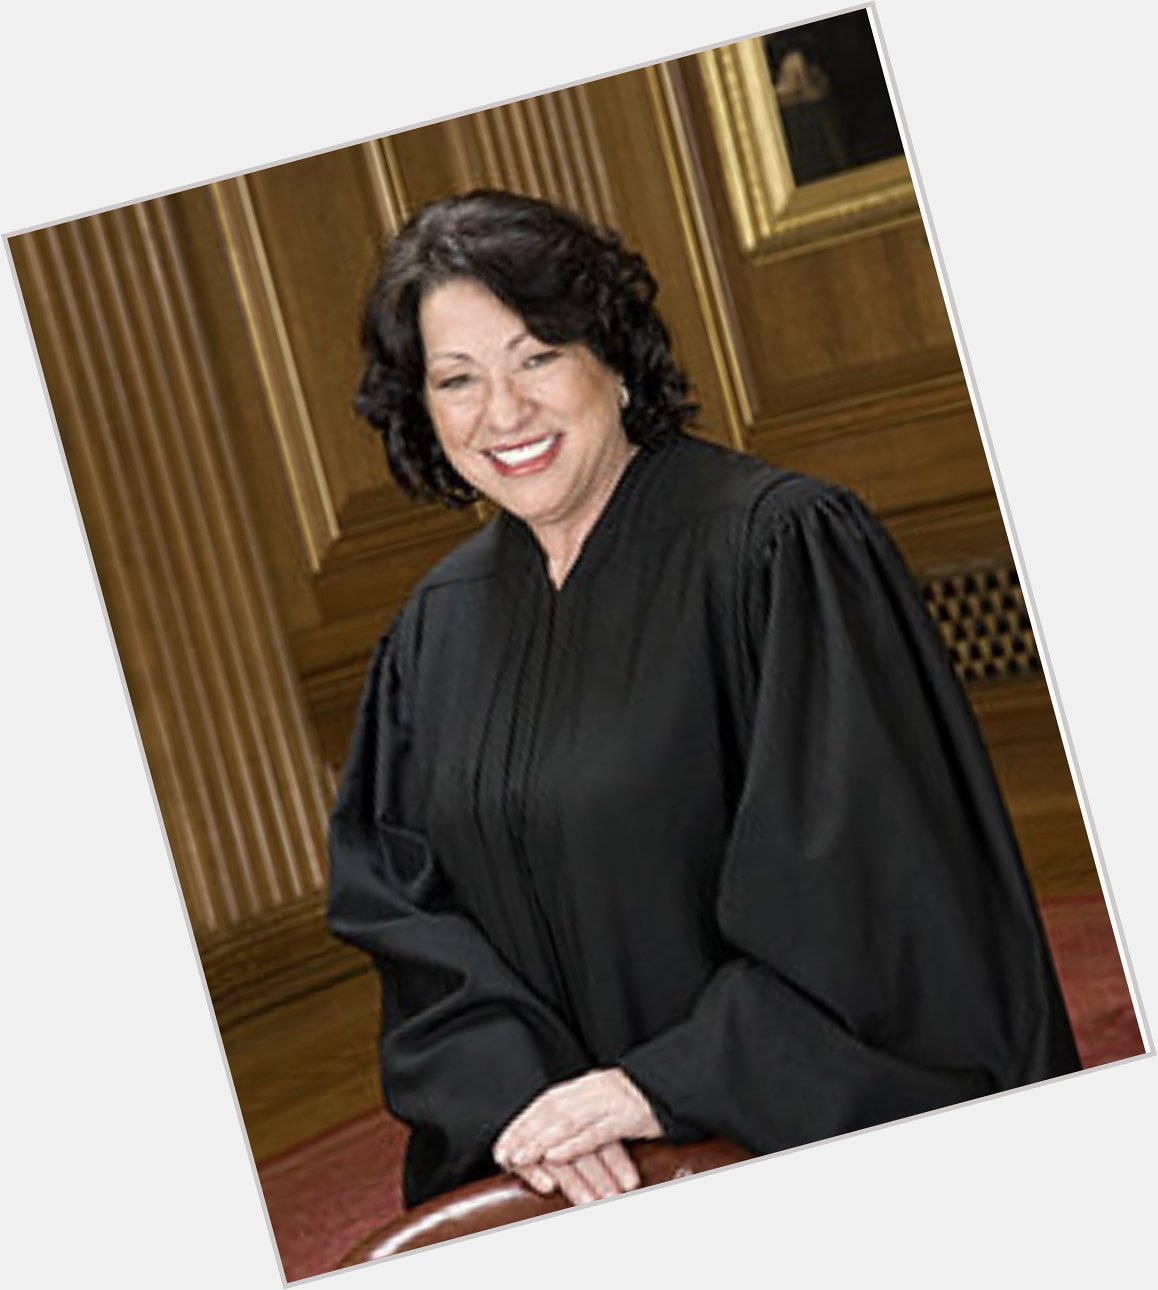 Happy 67th birthday to Justice Sonia Sotomayor!  And many happy returns! 